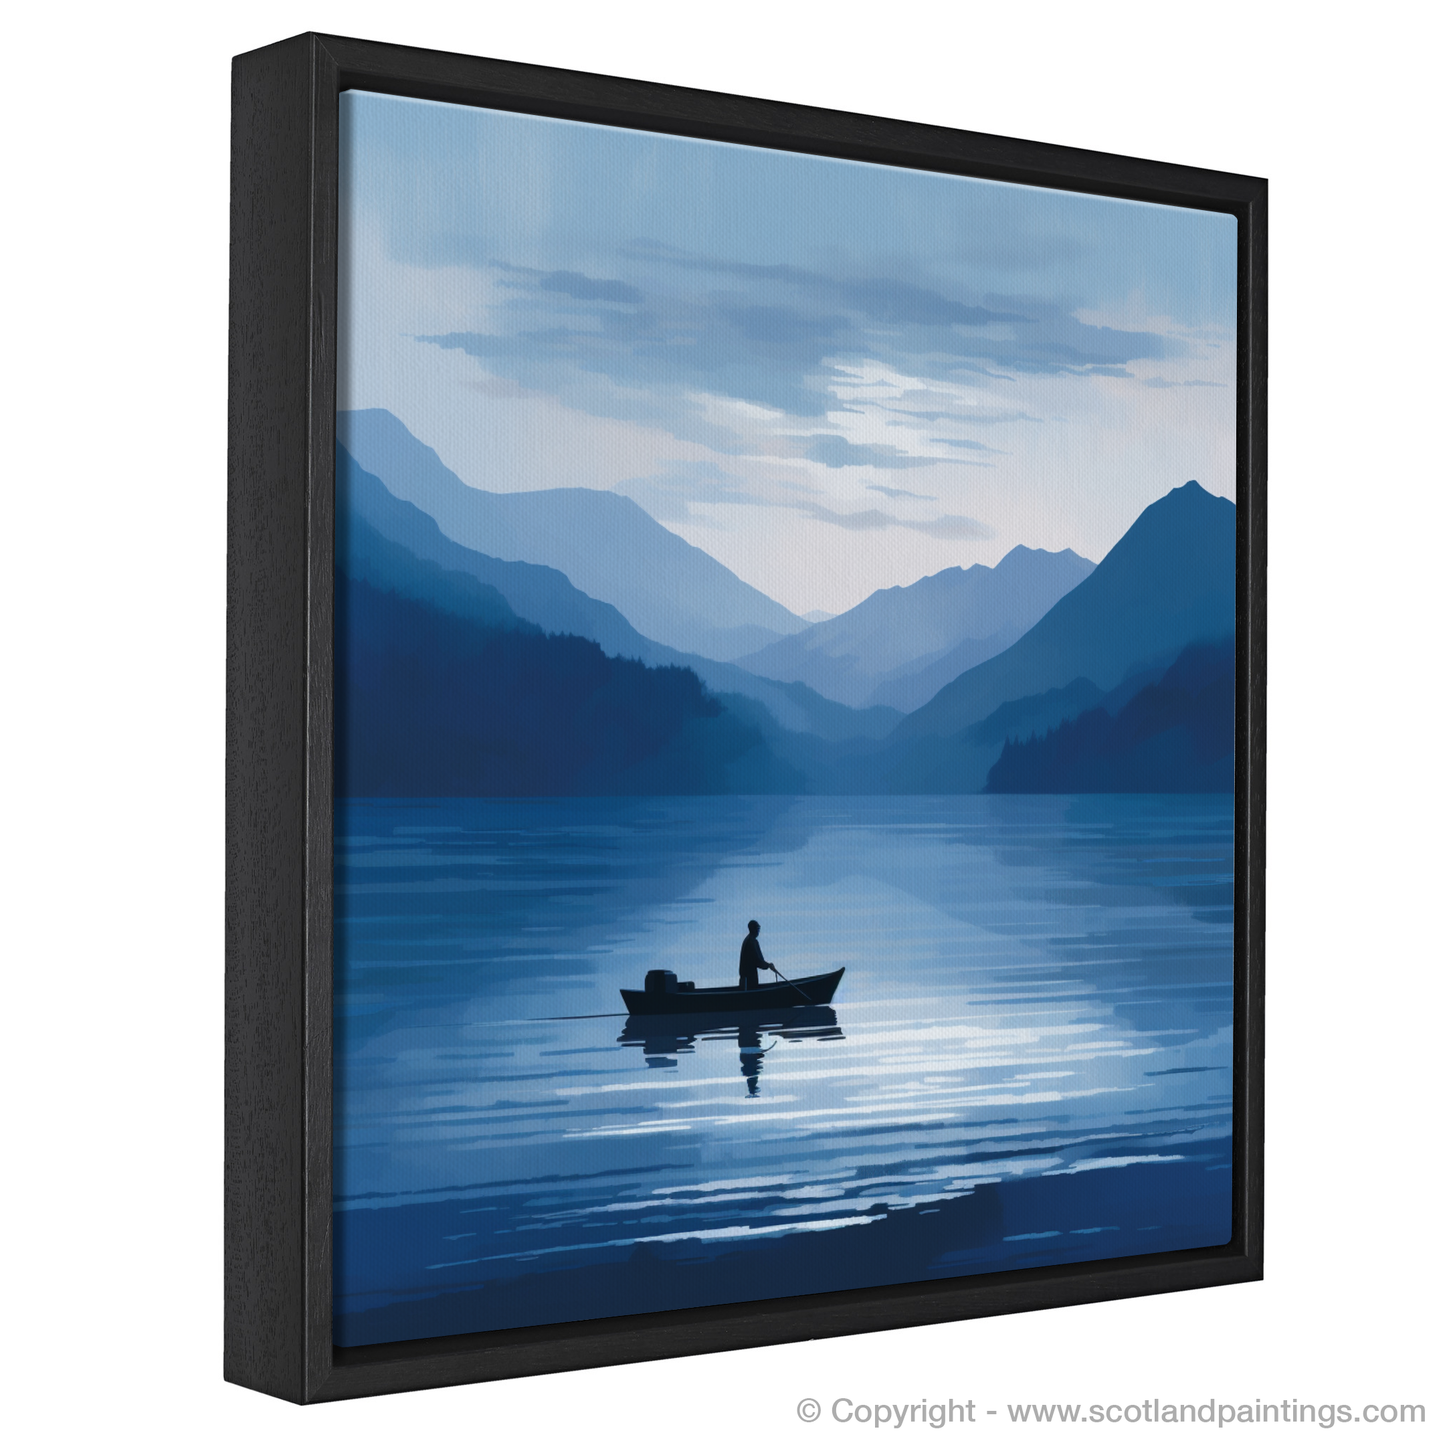 Painting and Art Print of Silhouetted fisherman on Loch Lomond entitled "Silhouetted Fisherman on Loch Lomond: A Study in Serenity and Light".